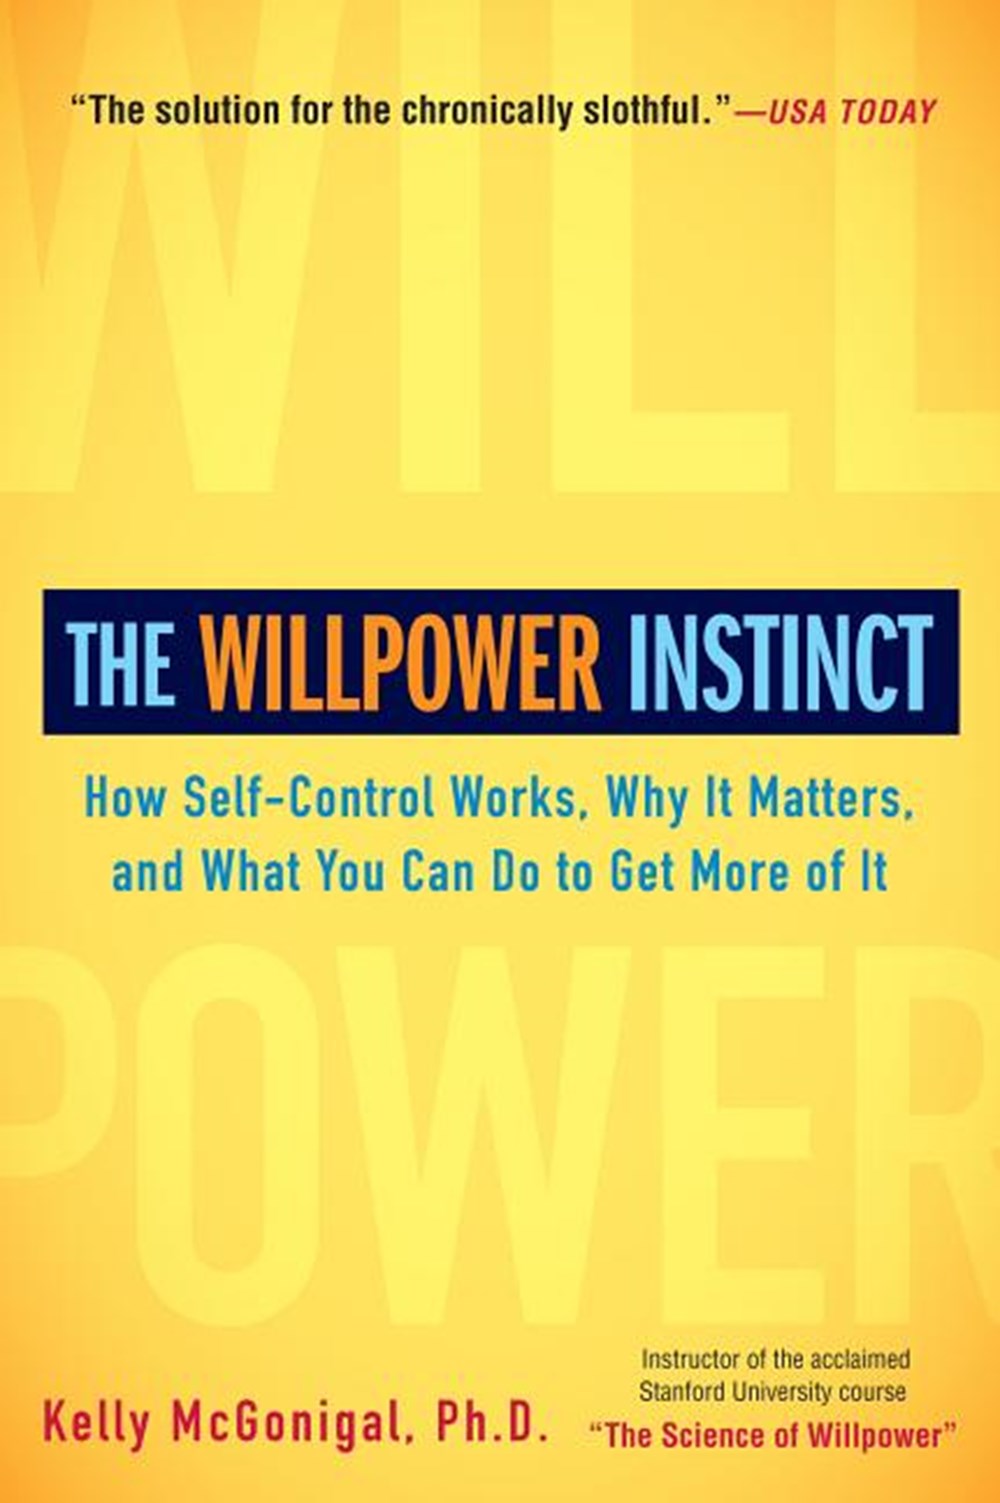 Willpower Instinct How Self-Control Works, Why It Matters, and What You Can Do to Get More of It